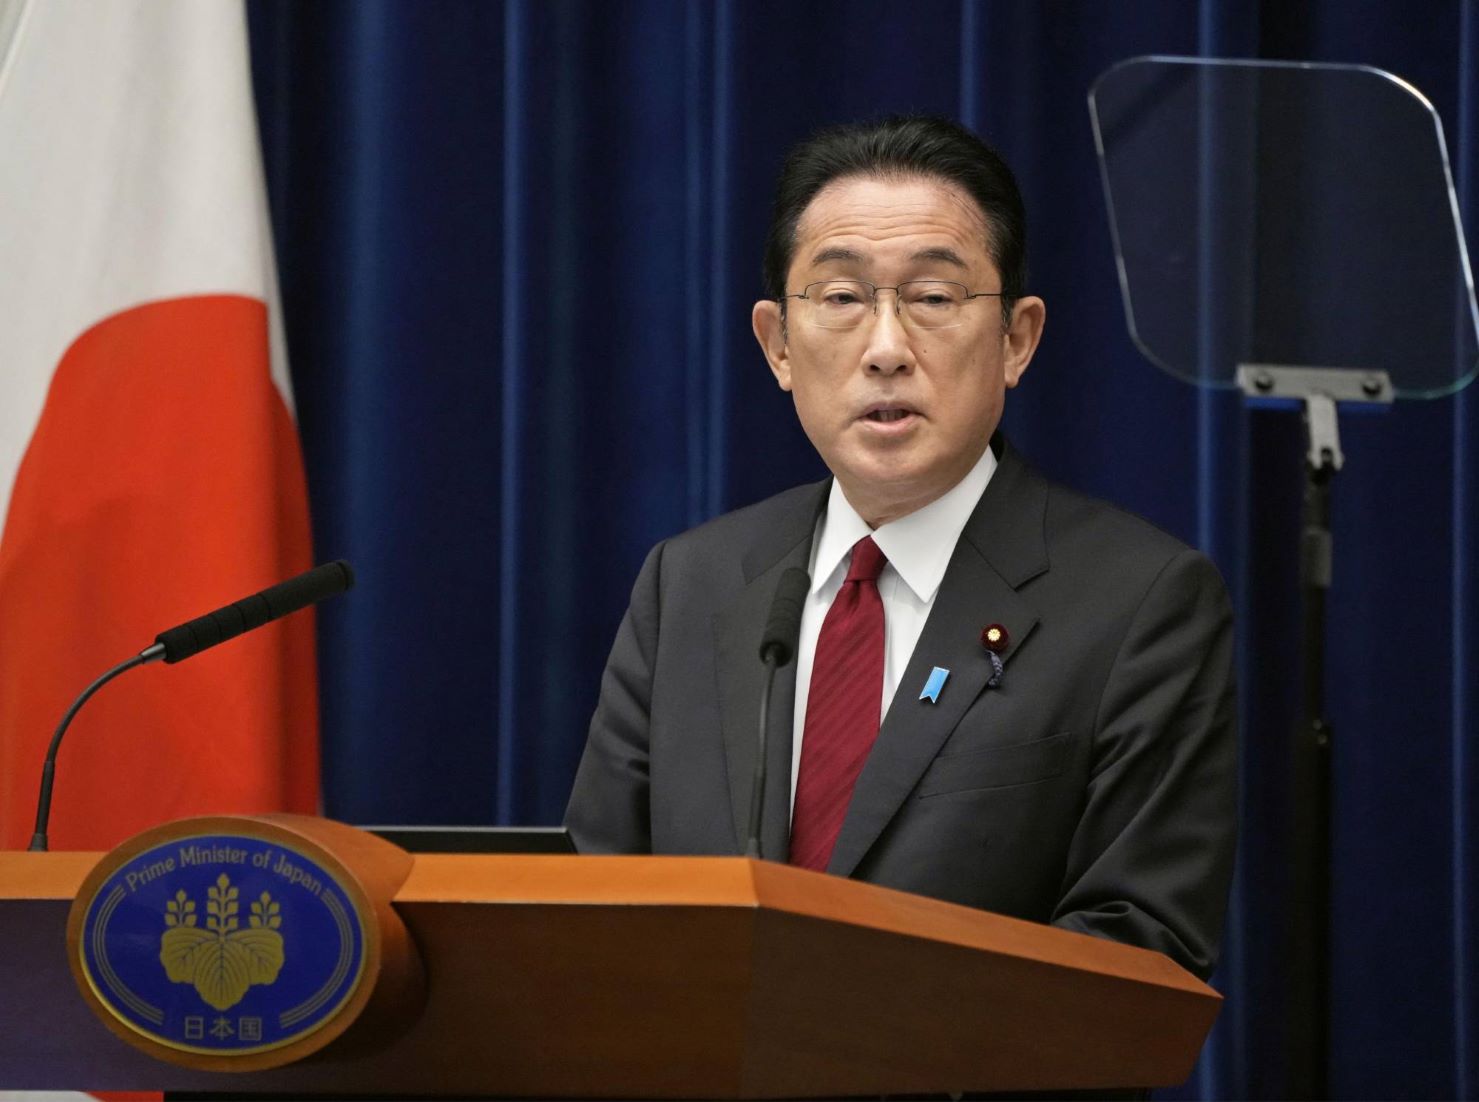 Japan Announced Further Sanctions On Russia